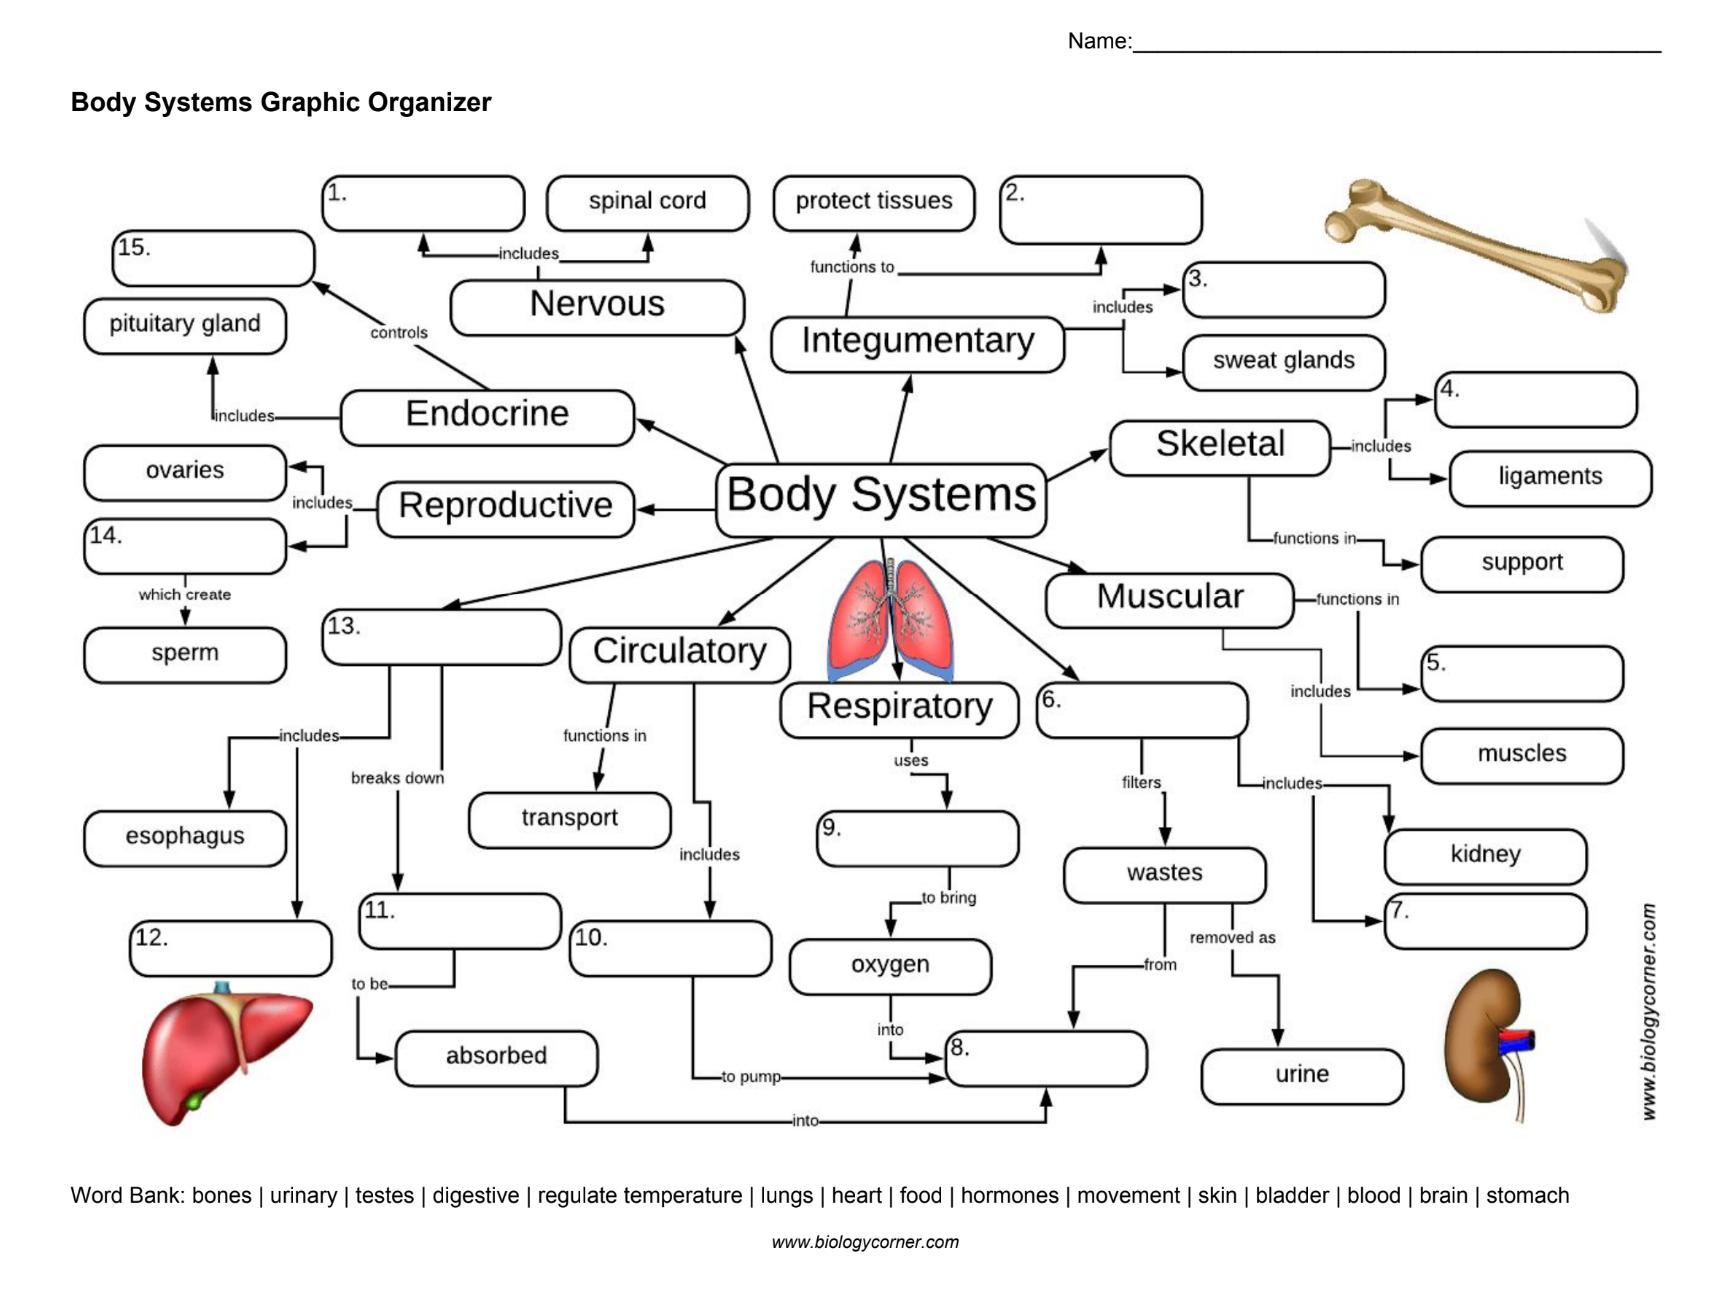 Body Systems Graphic Organizer.png